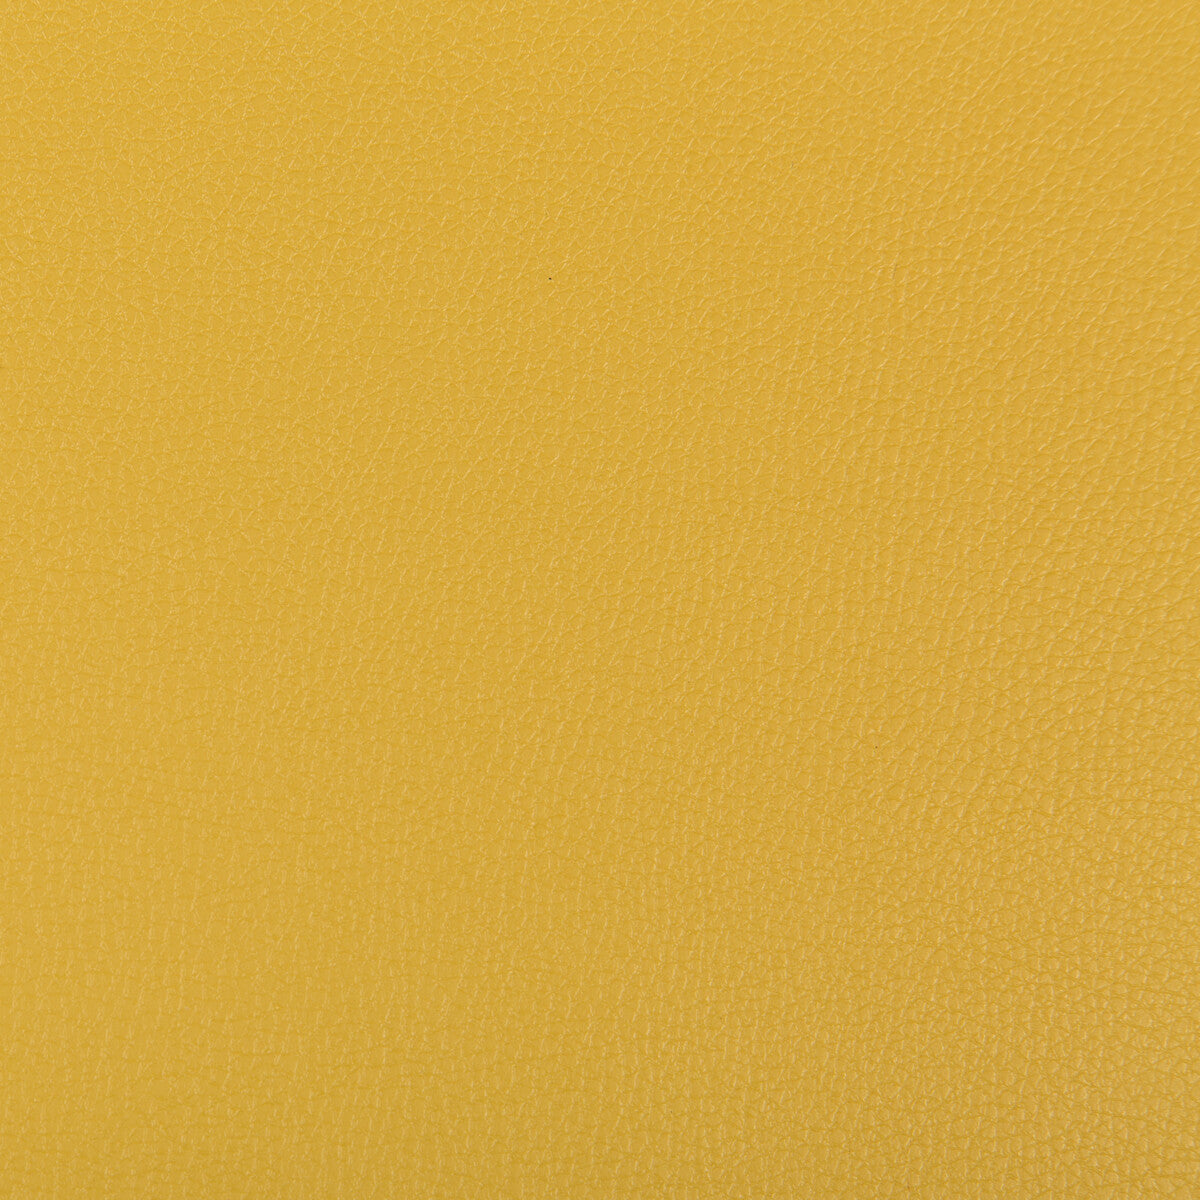 Syrus fabric in mustard color - pattern SYRUS.440.0 - by Kravet Contract